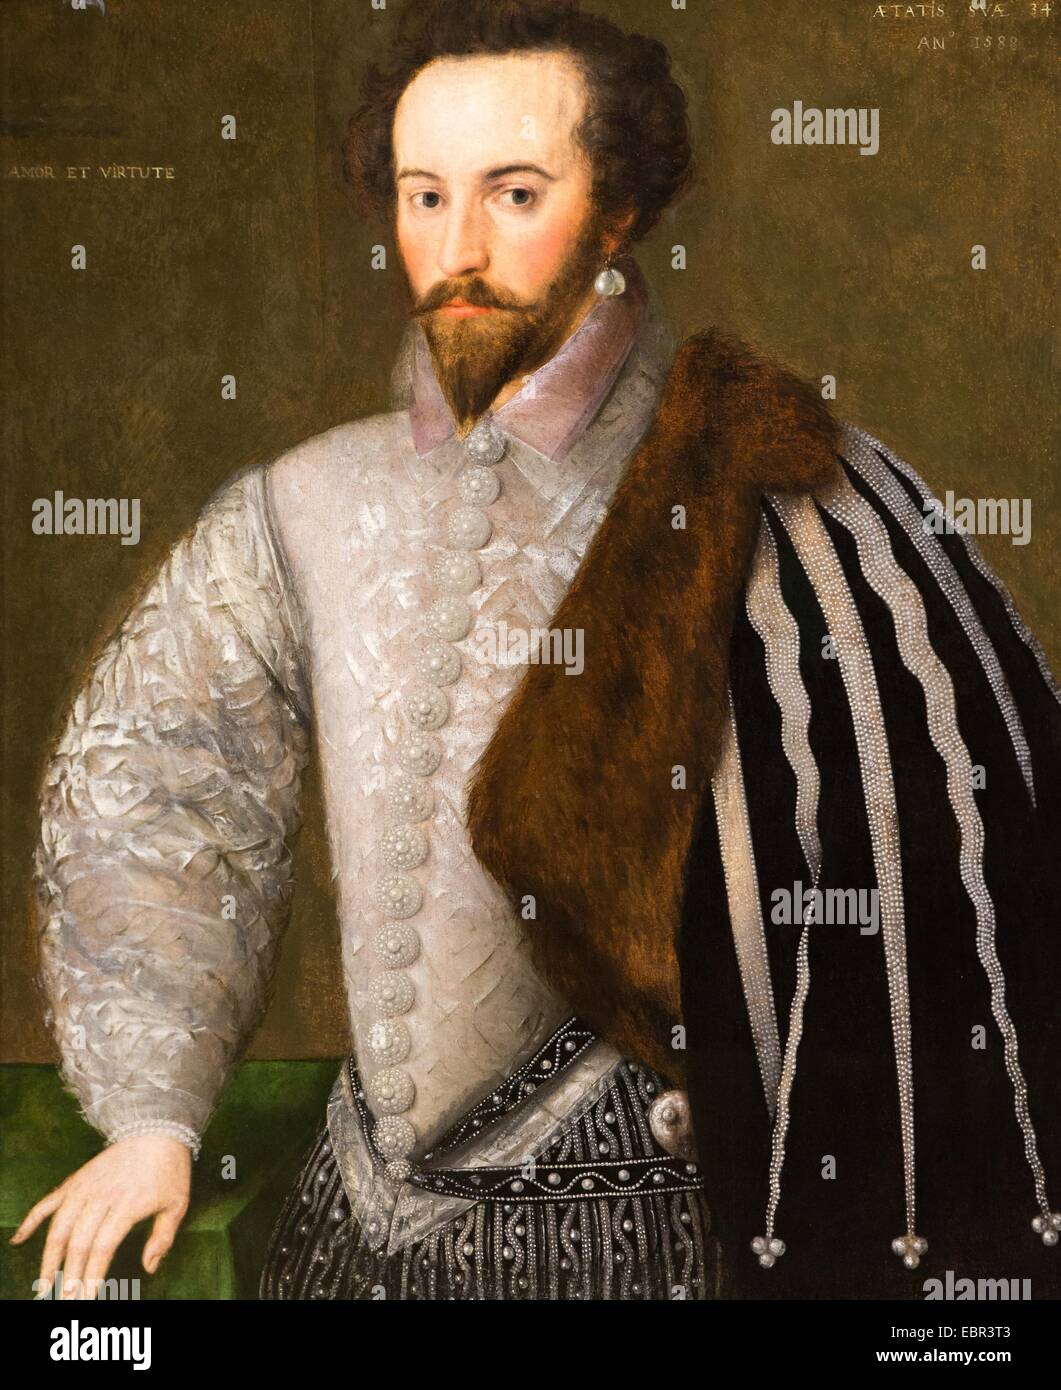 ActiveMuseum 0003640.jpg / Sir Walter Ralegh, a favorite of Elisabeth I, was a poet, explorer and soldier, 1588 - unknow artist 22/01/2014  -   / 16th century Collection / Active Museum Stock Photo